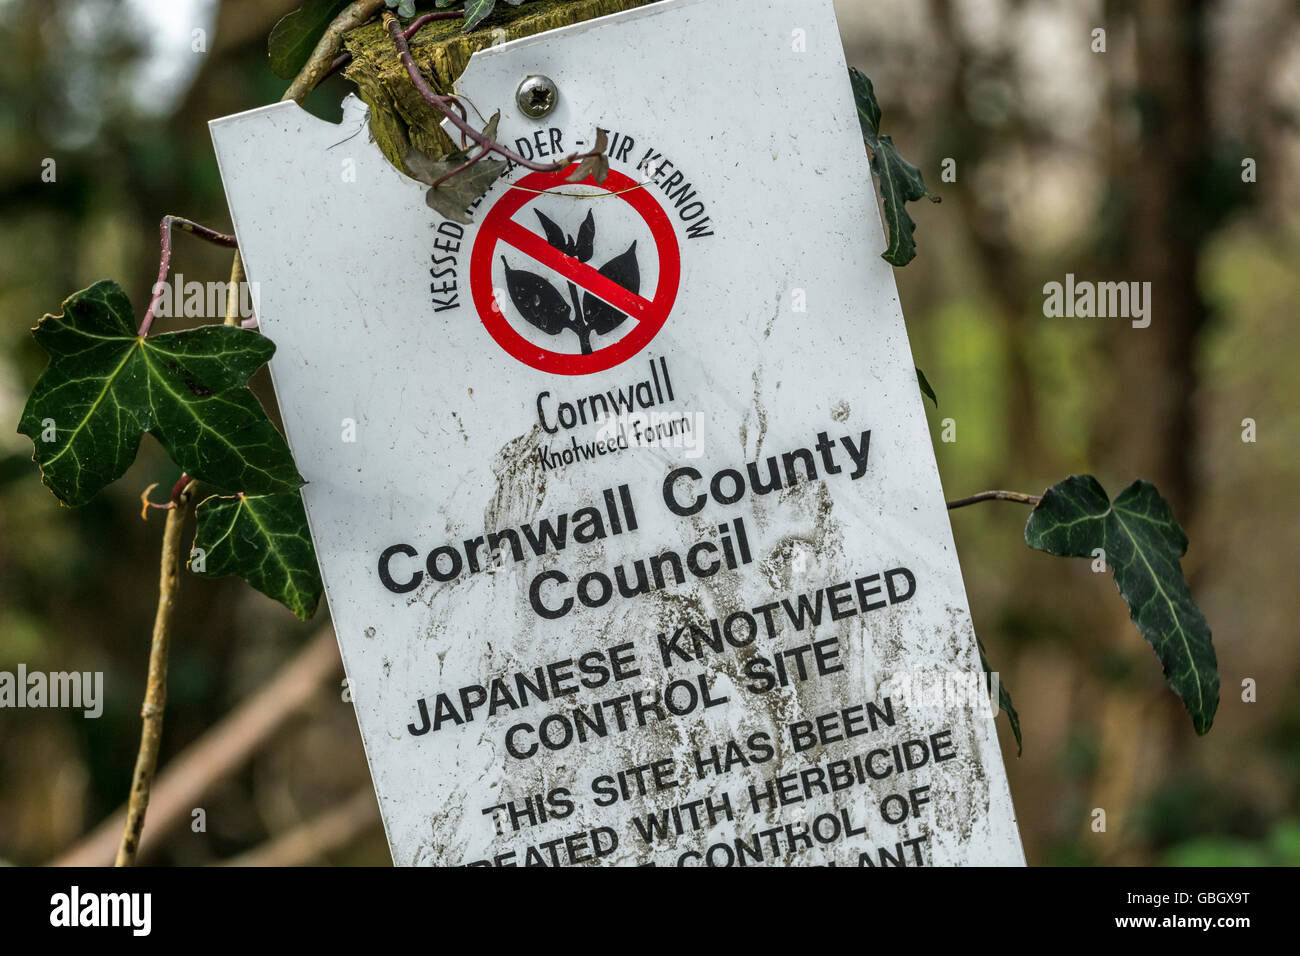 Invasive species concept. Warning sign for Japanese Knotweed [Fallopia japonica] control site in Cornwall. Stock Photo